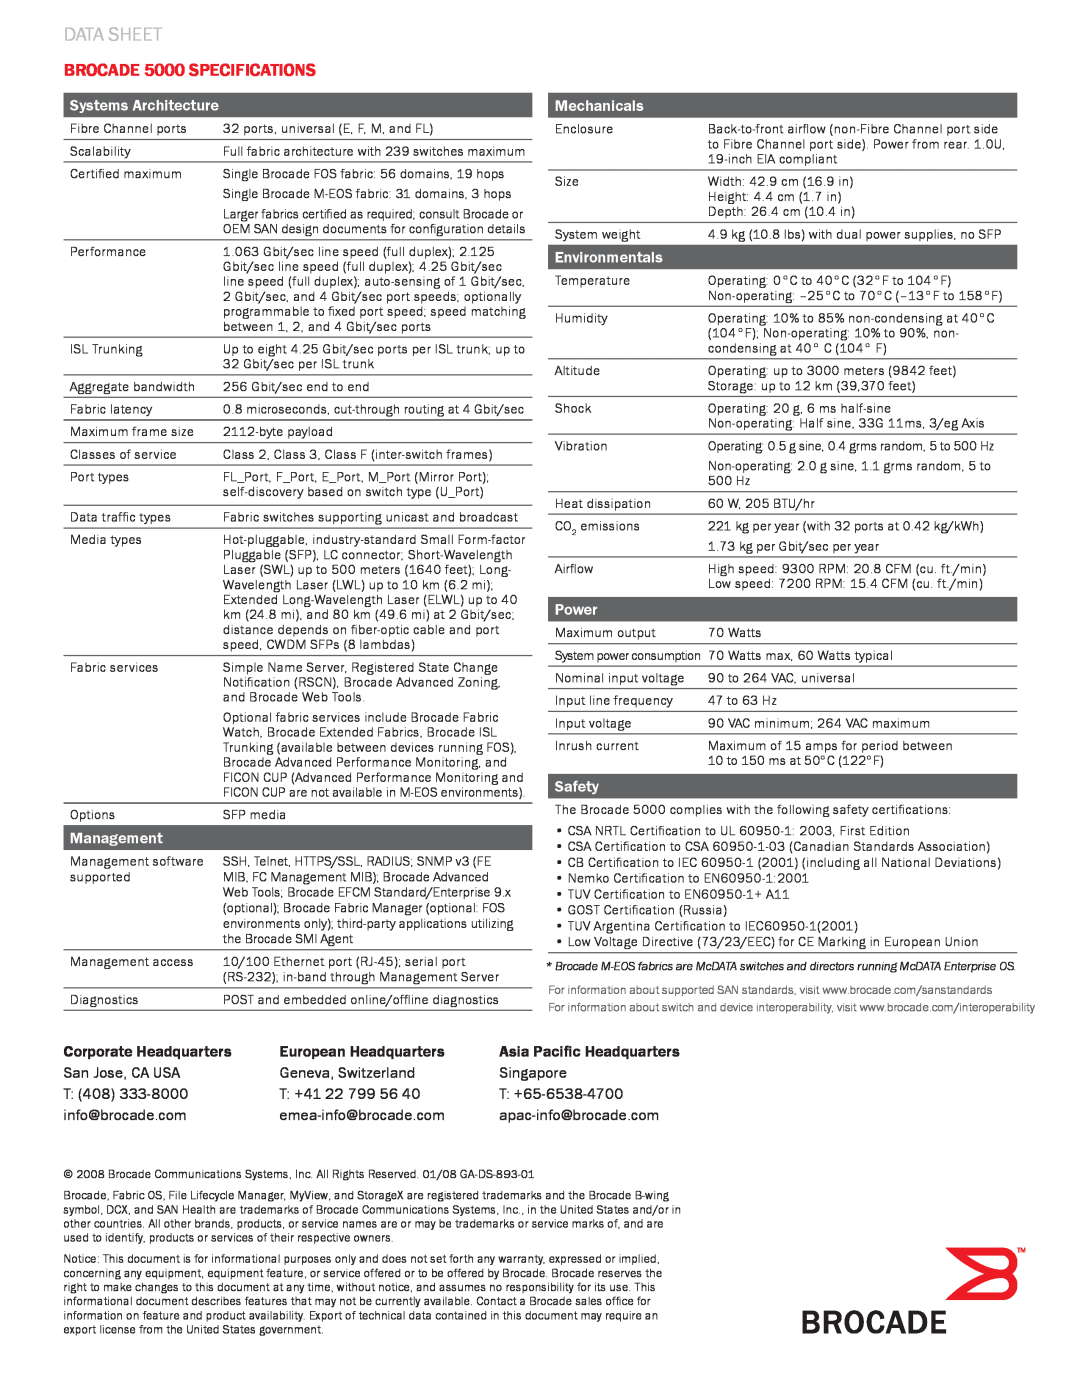 Brocade Communications Systems Brocade 5000 SPECIFICATIONS, Data Sheet, Systems Architecture, Management, Mechanicals 